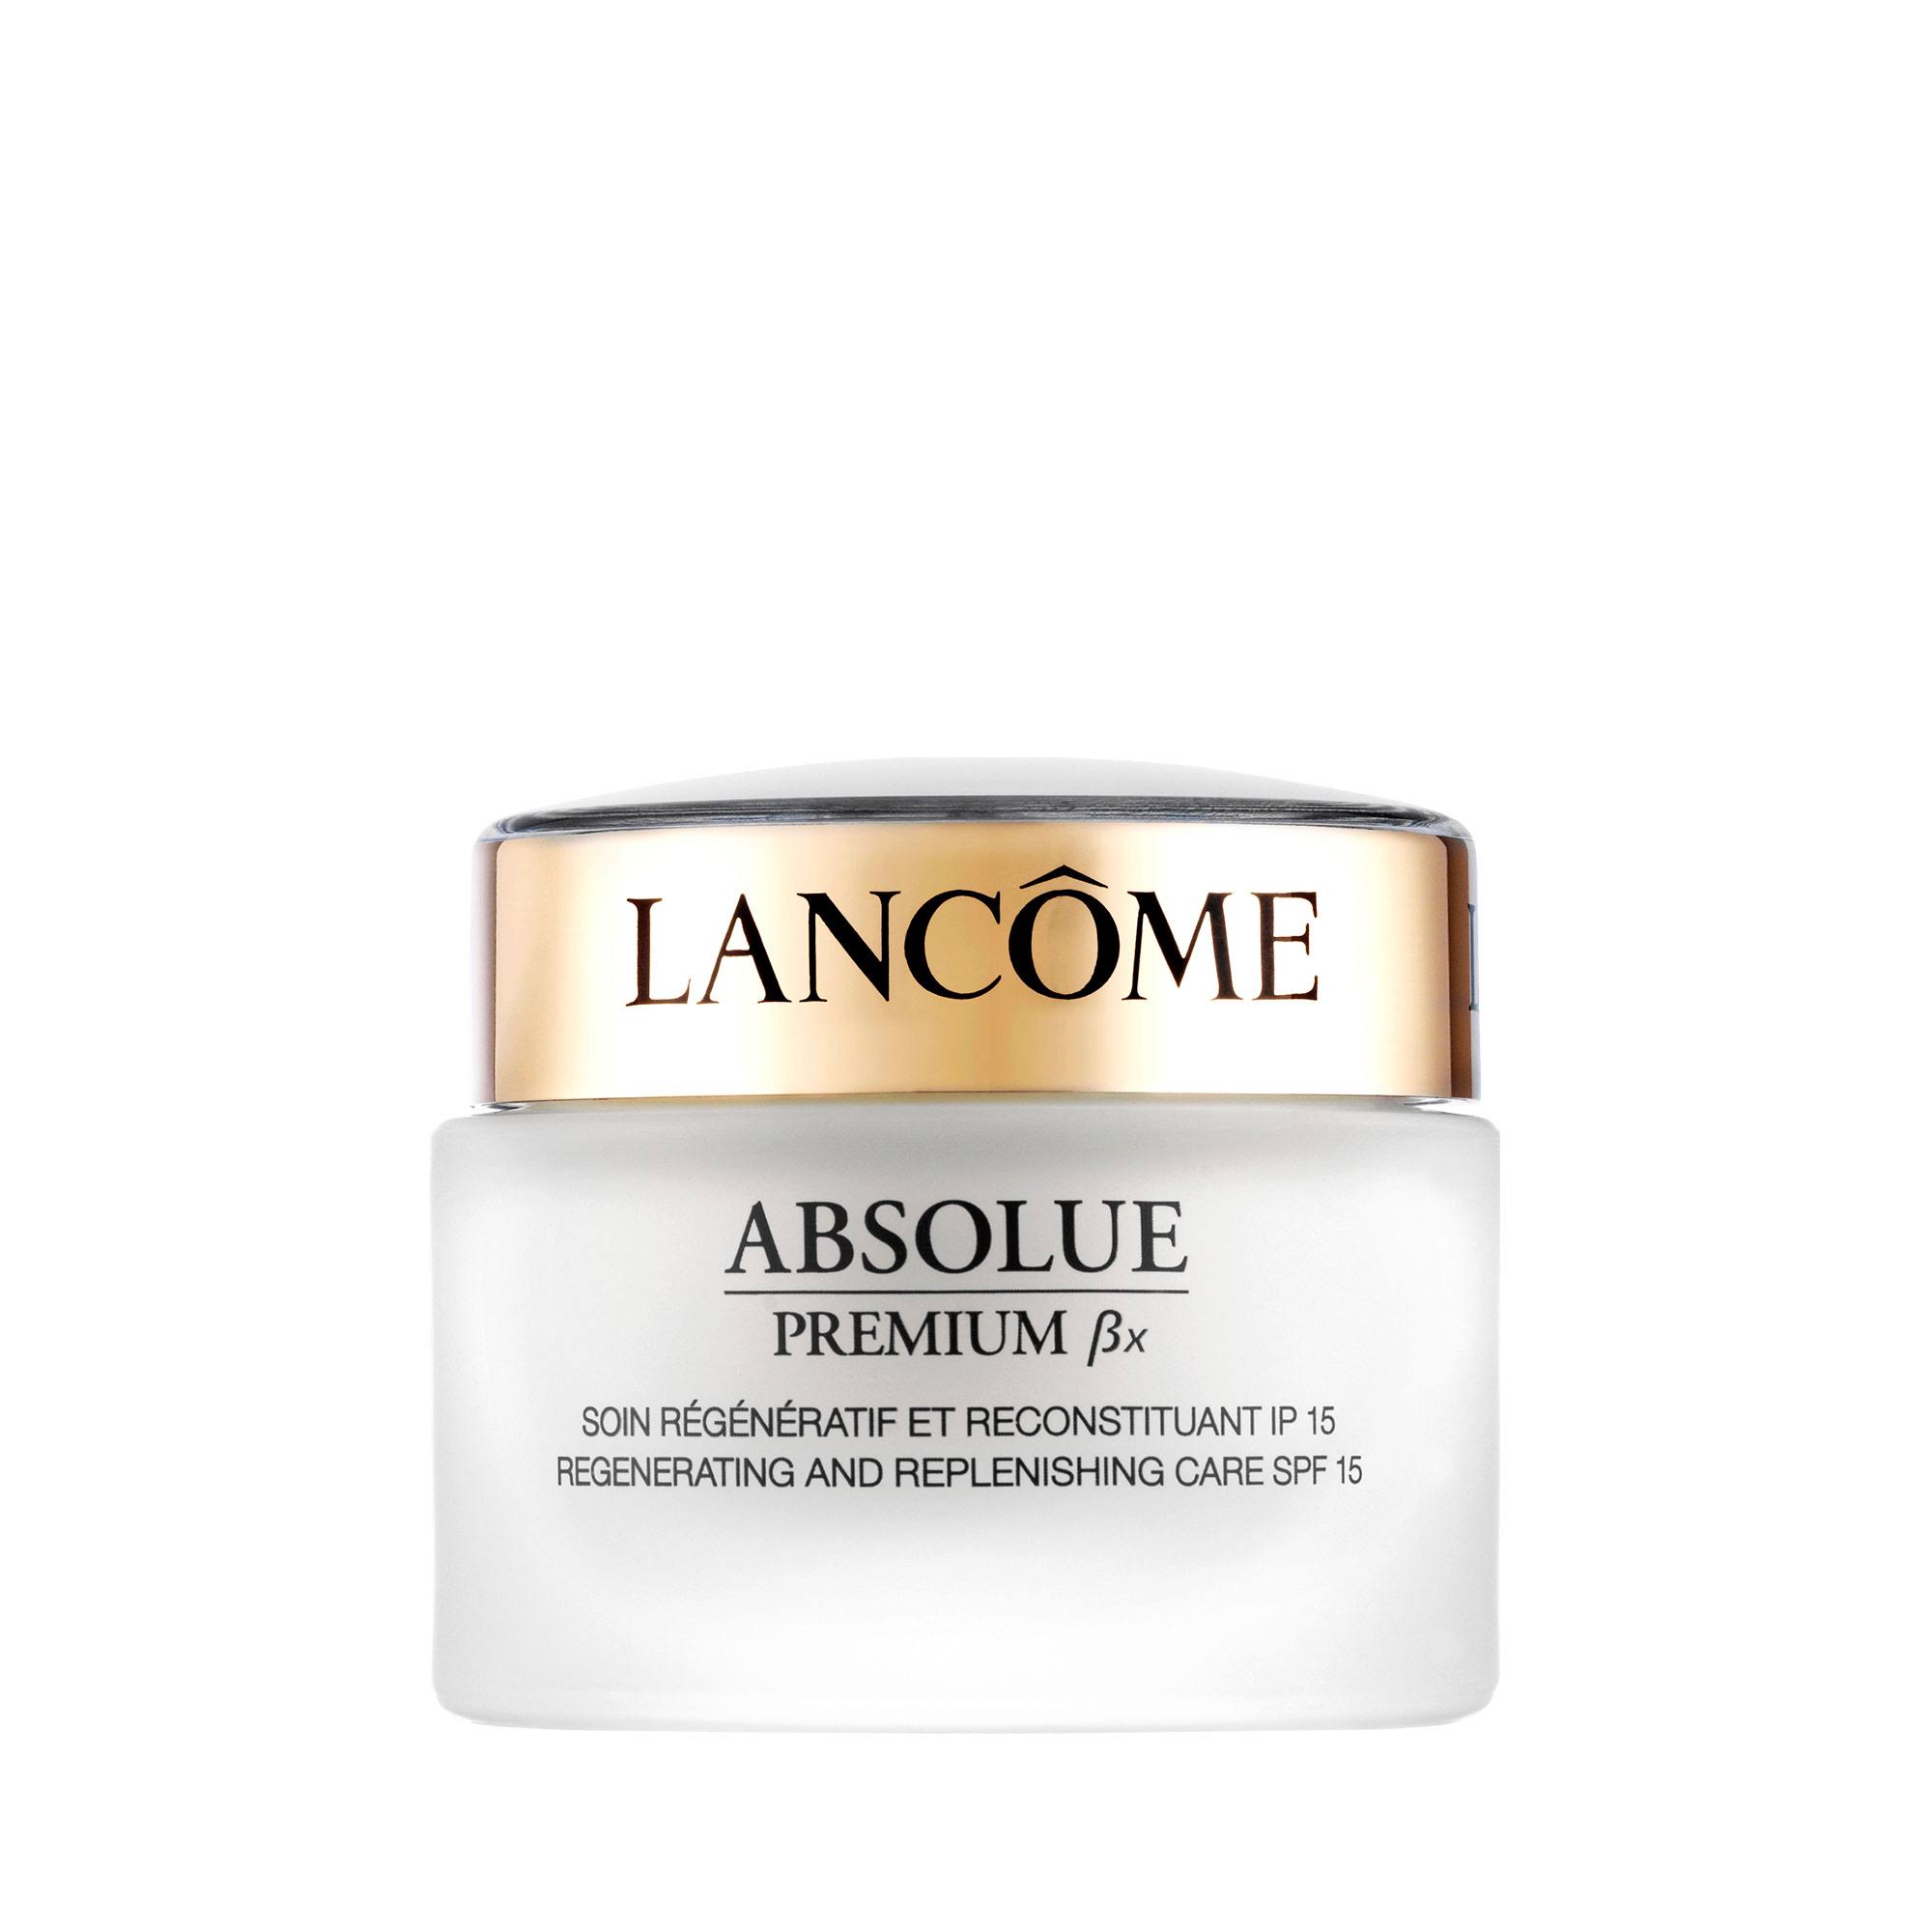 Lancome Absolue Premium Bx Regenerating and Replenishing Care SPF 15